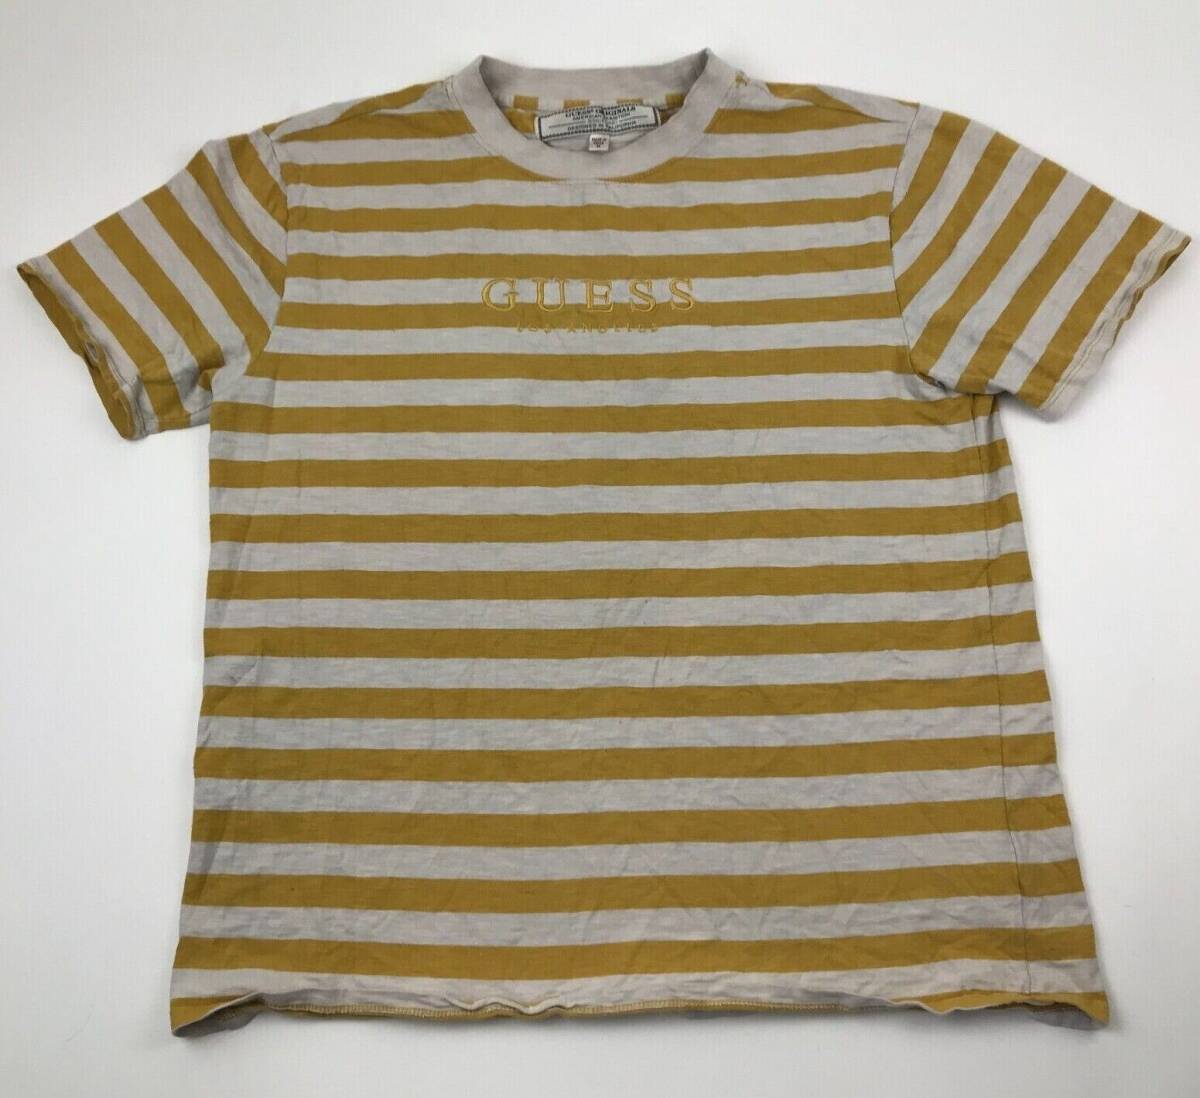 VINTAGE Guess Shirt Size Medium M Yellow White Striped Tee Adult ASAP Rocky 90s 海外 即決_VINTAGE Guess Shir 1